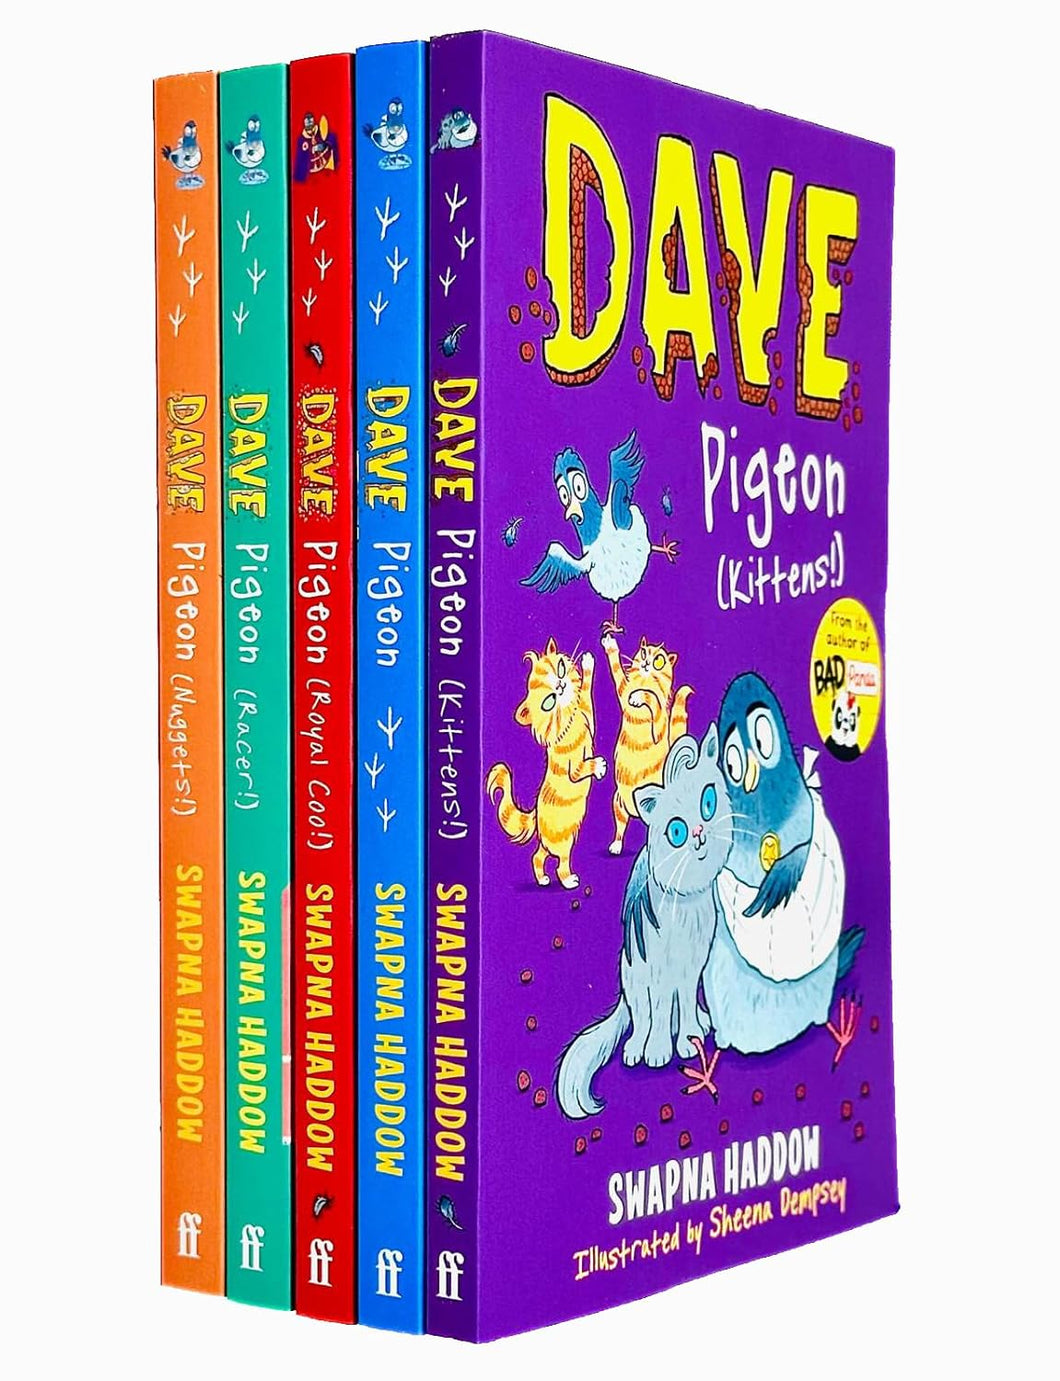 Dave Pigeon Series by Swapna Haddow 5 Books Collection Set - Ages 5-9 - Paperback